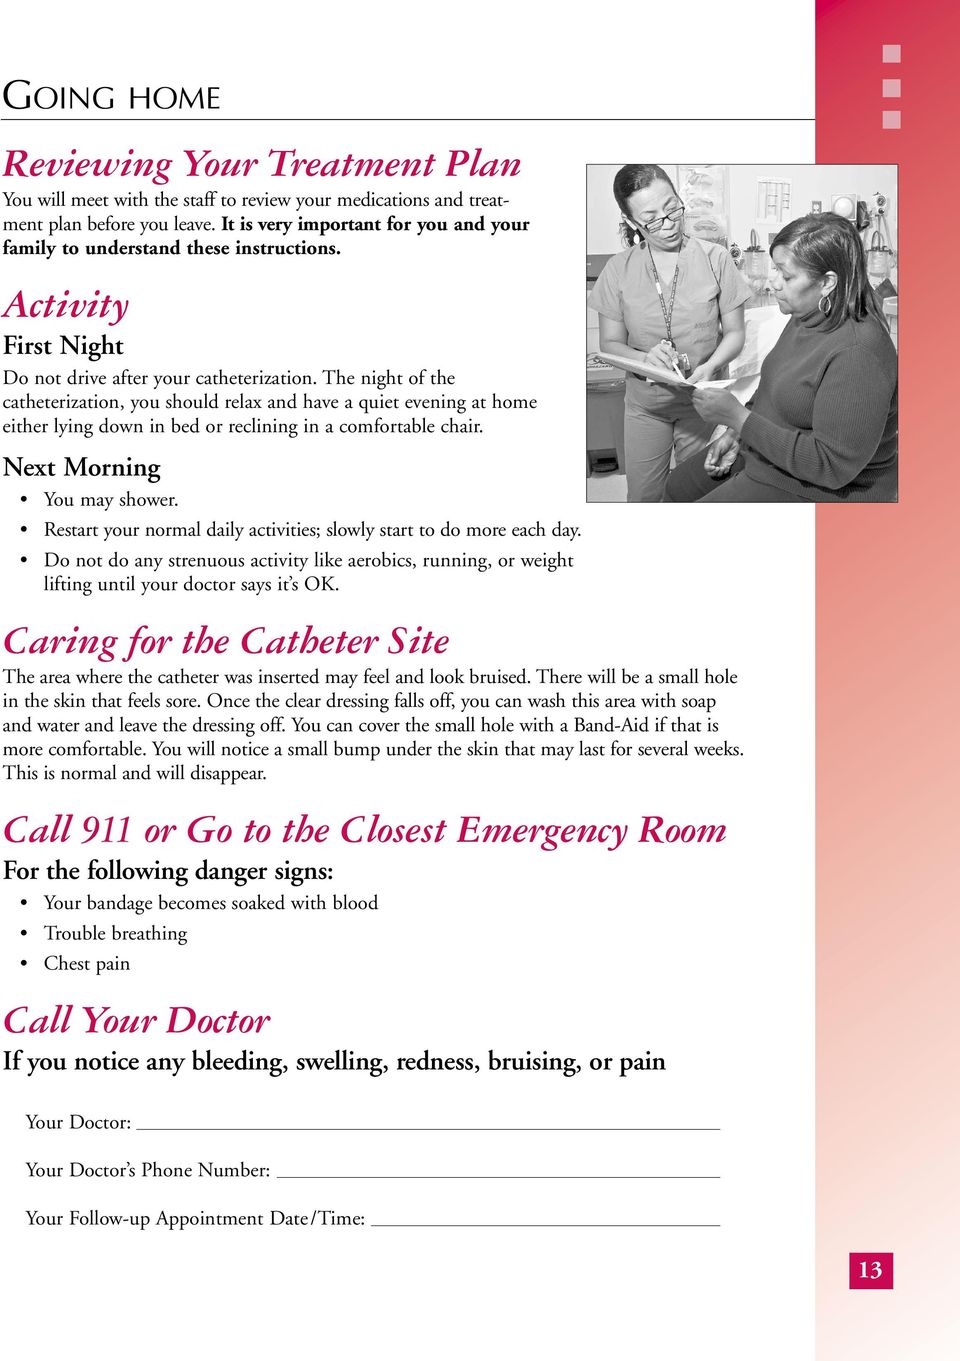 The night of the catheterization, you should relax and have a quiet evening at home either lying down in bed or reclining in a comfortable chair. Next Morning You may shower.